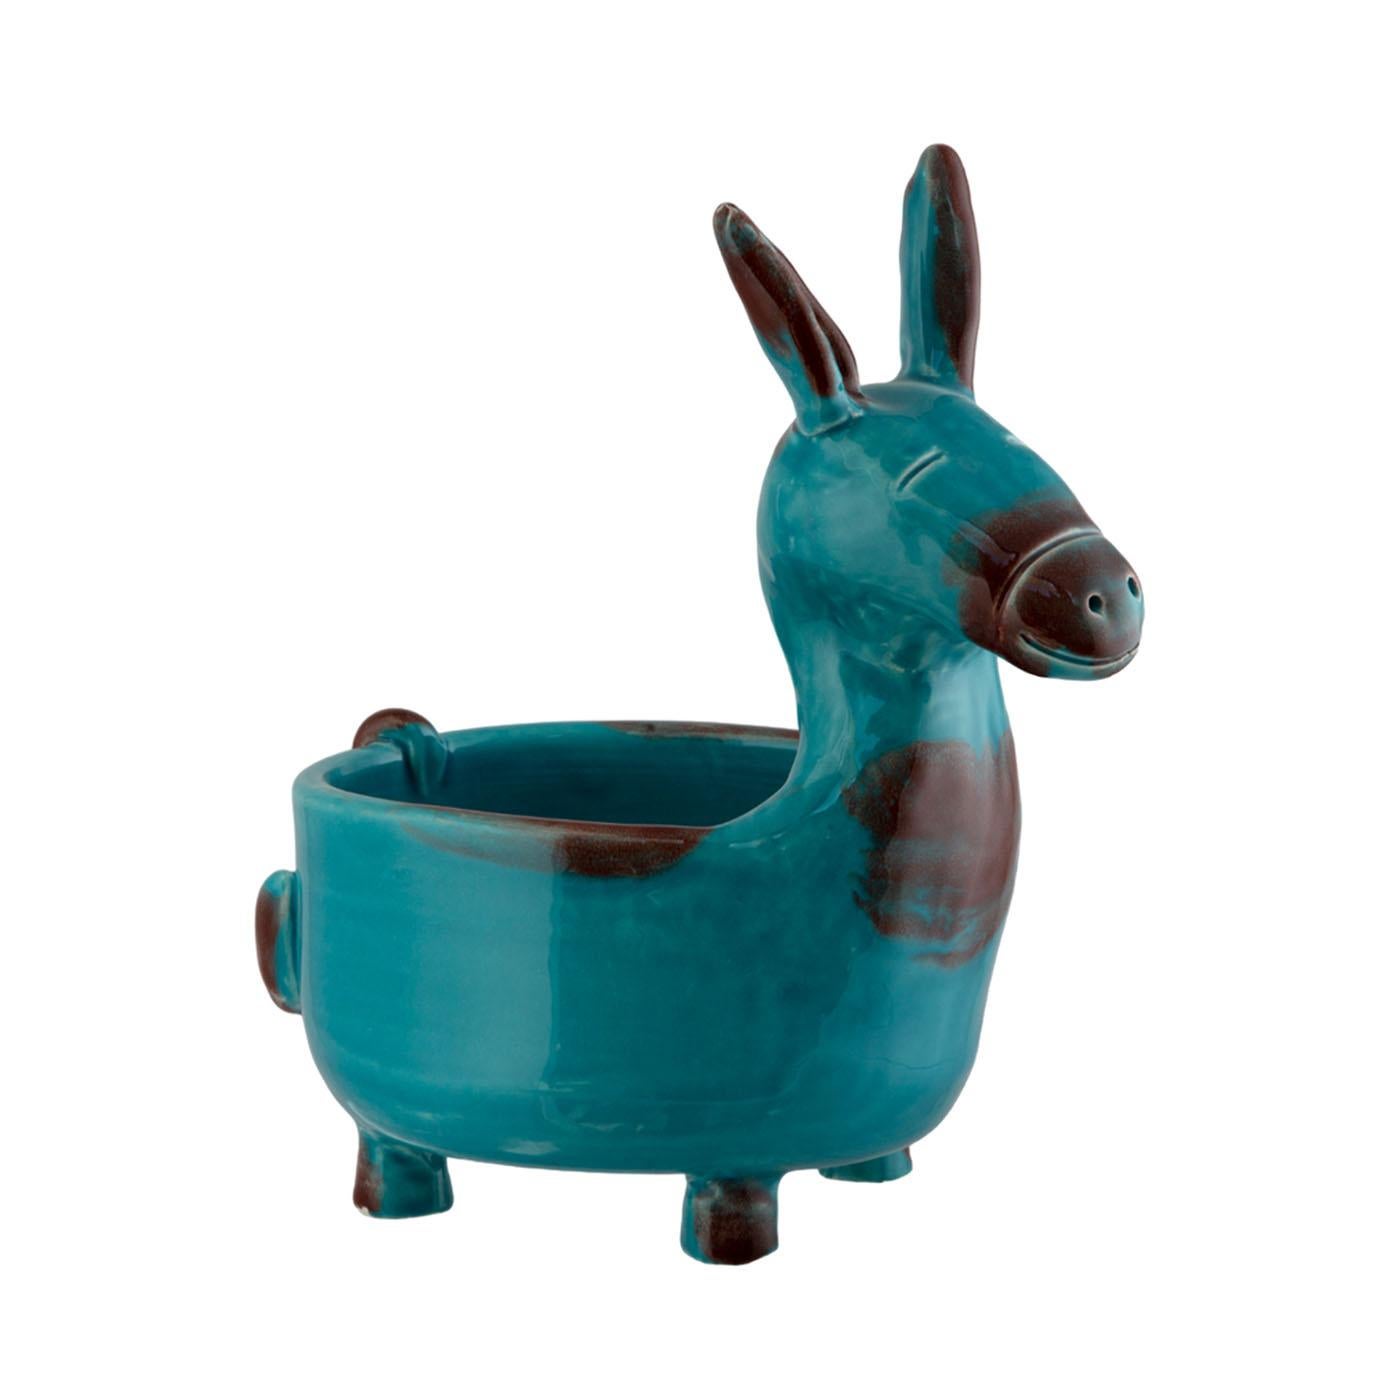 The charming Little Donkey, fashioned from hand-worked clay and fired in a second round with vibrant colored crystals, embodies versatility. This figurative vase serves multiple purposes as a plant or object holder and occasionally doubles as a